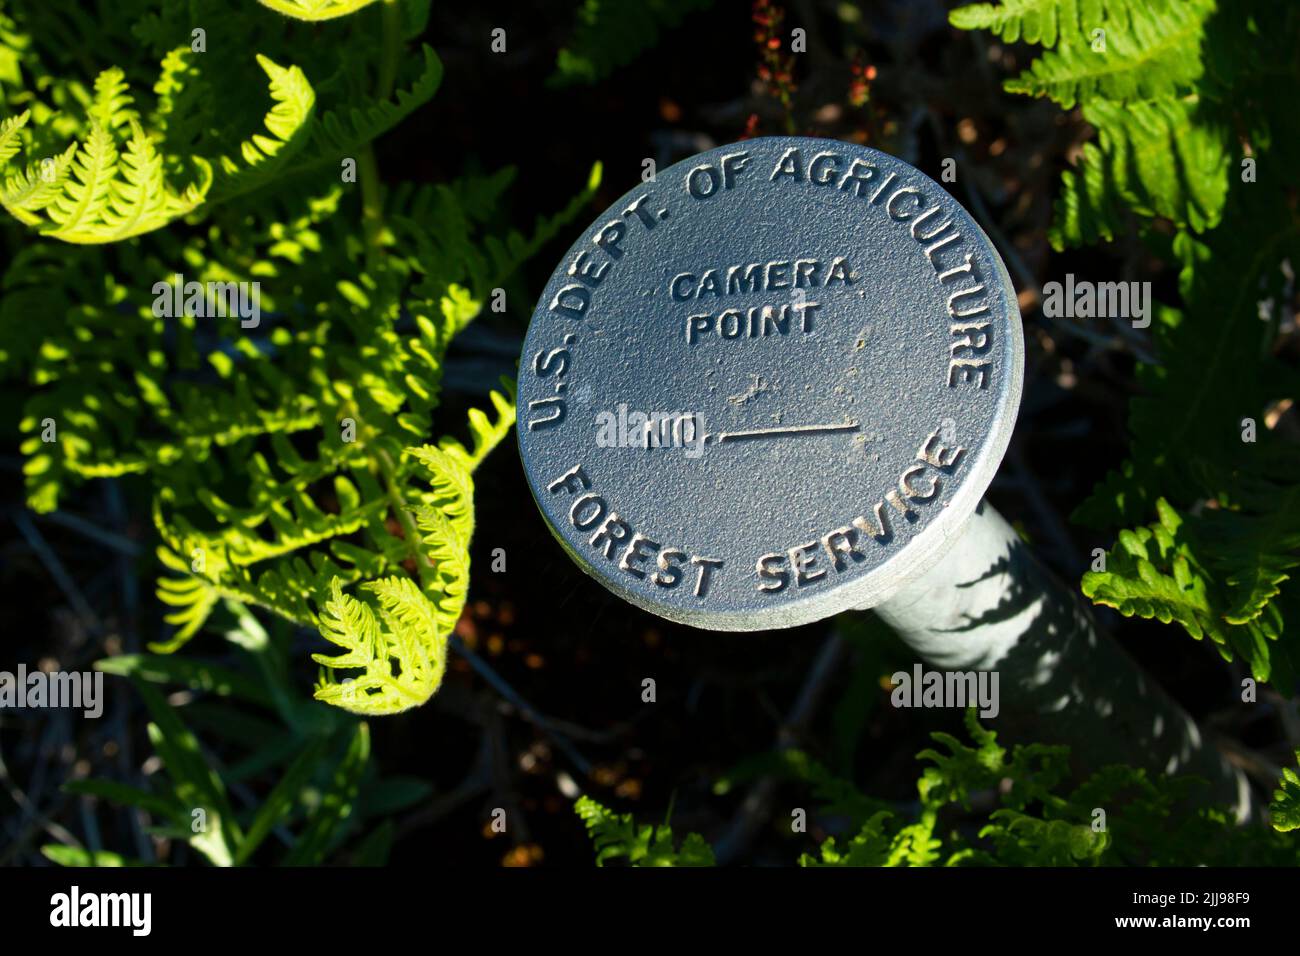 Camera Point USGS marker at Norway Pass, Mt St Helens National Volcanic Monument, Washington Stock Photo